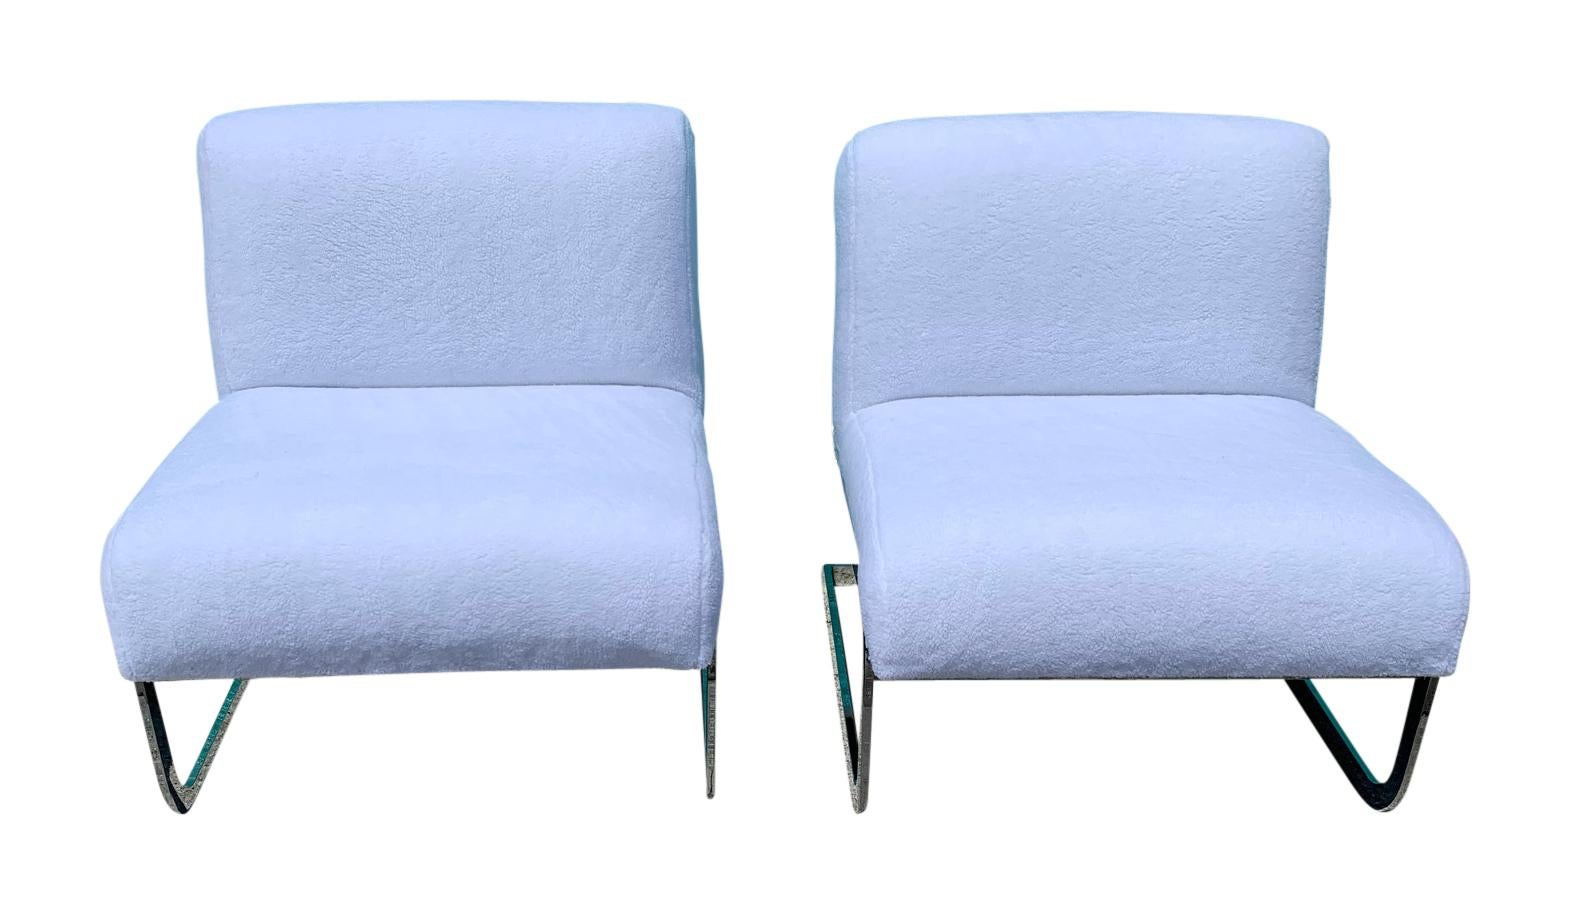 Pair of chrome Cantilever lounge chairs attributed to Milo Baughman, Mid-Century Modern, new upholstery.